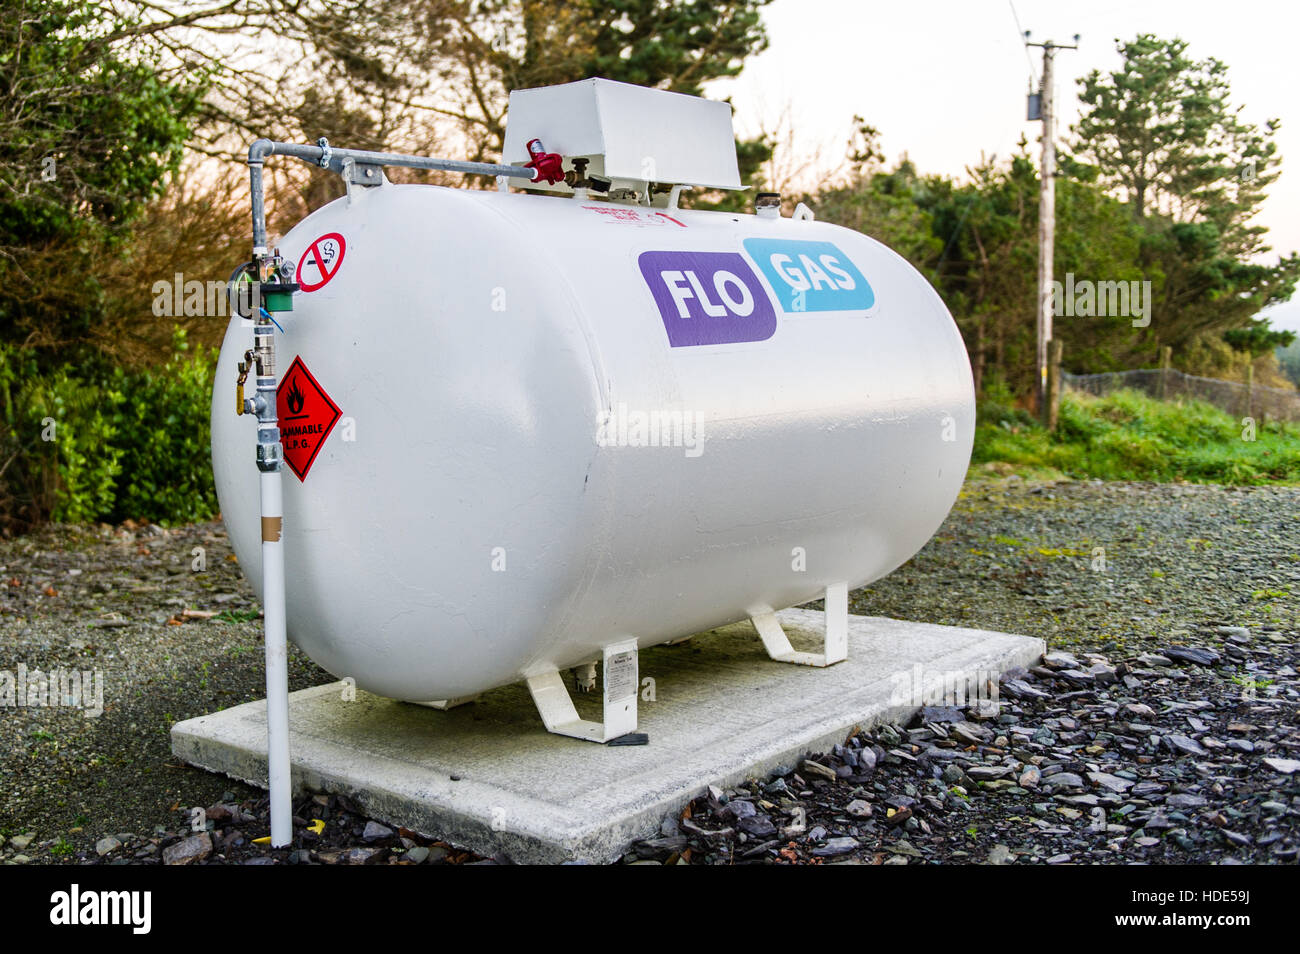 A Flo Gas gas tank in-situ on a domestic premises in Ireland. Stock Photo